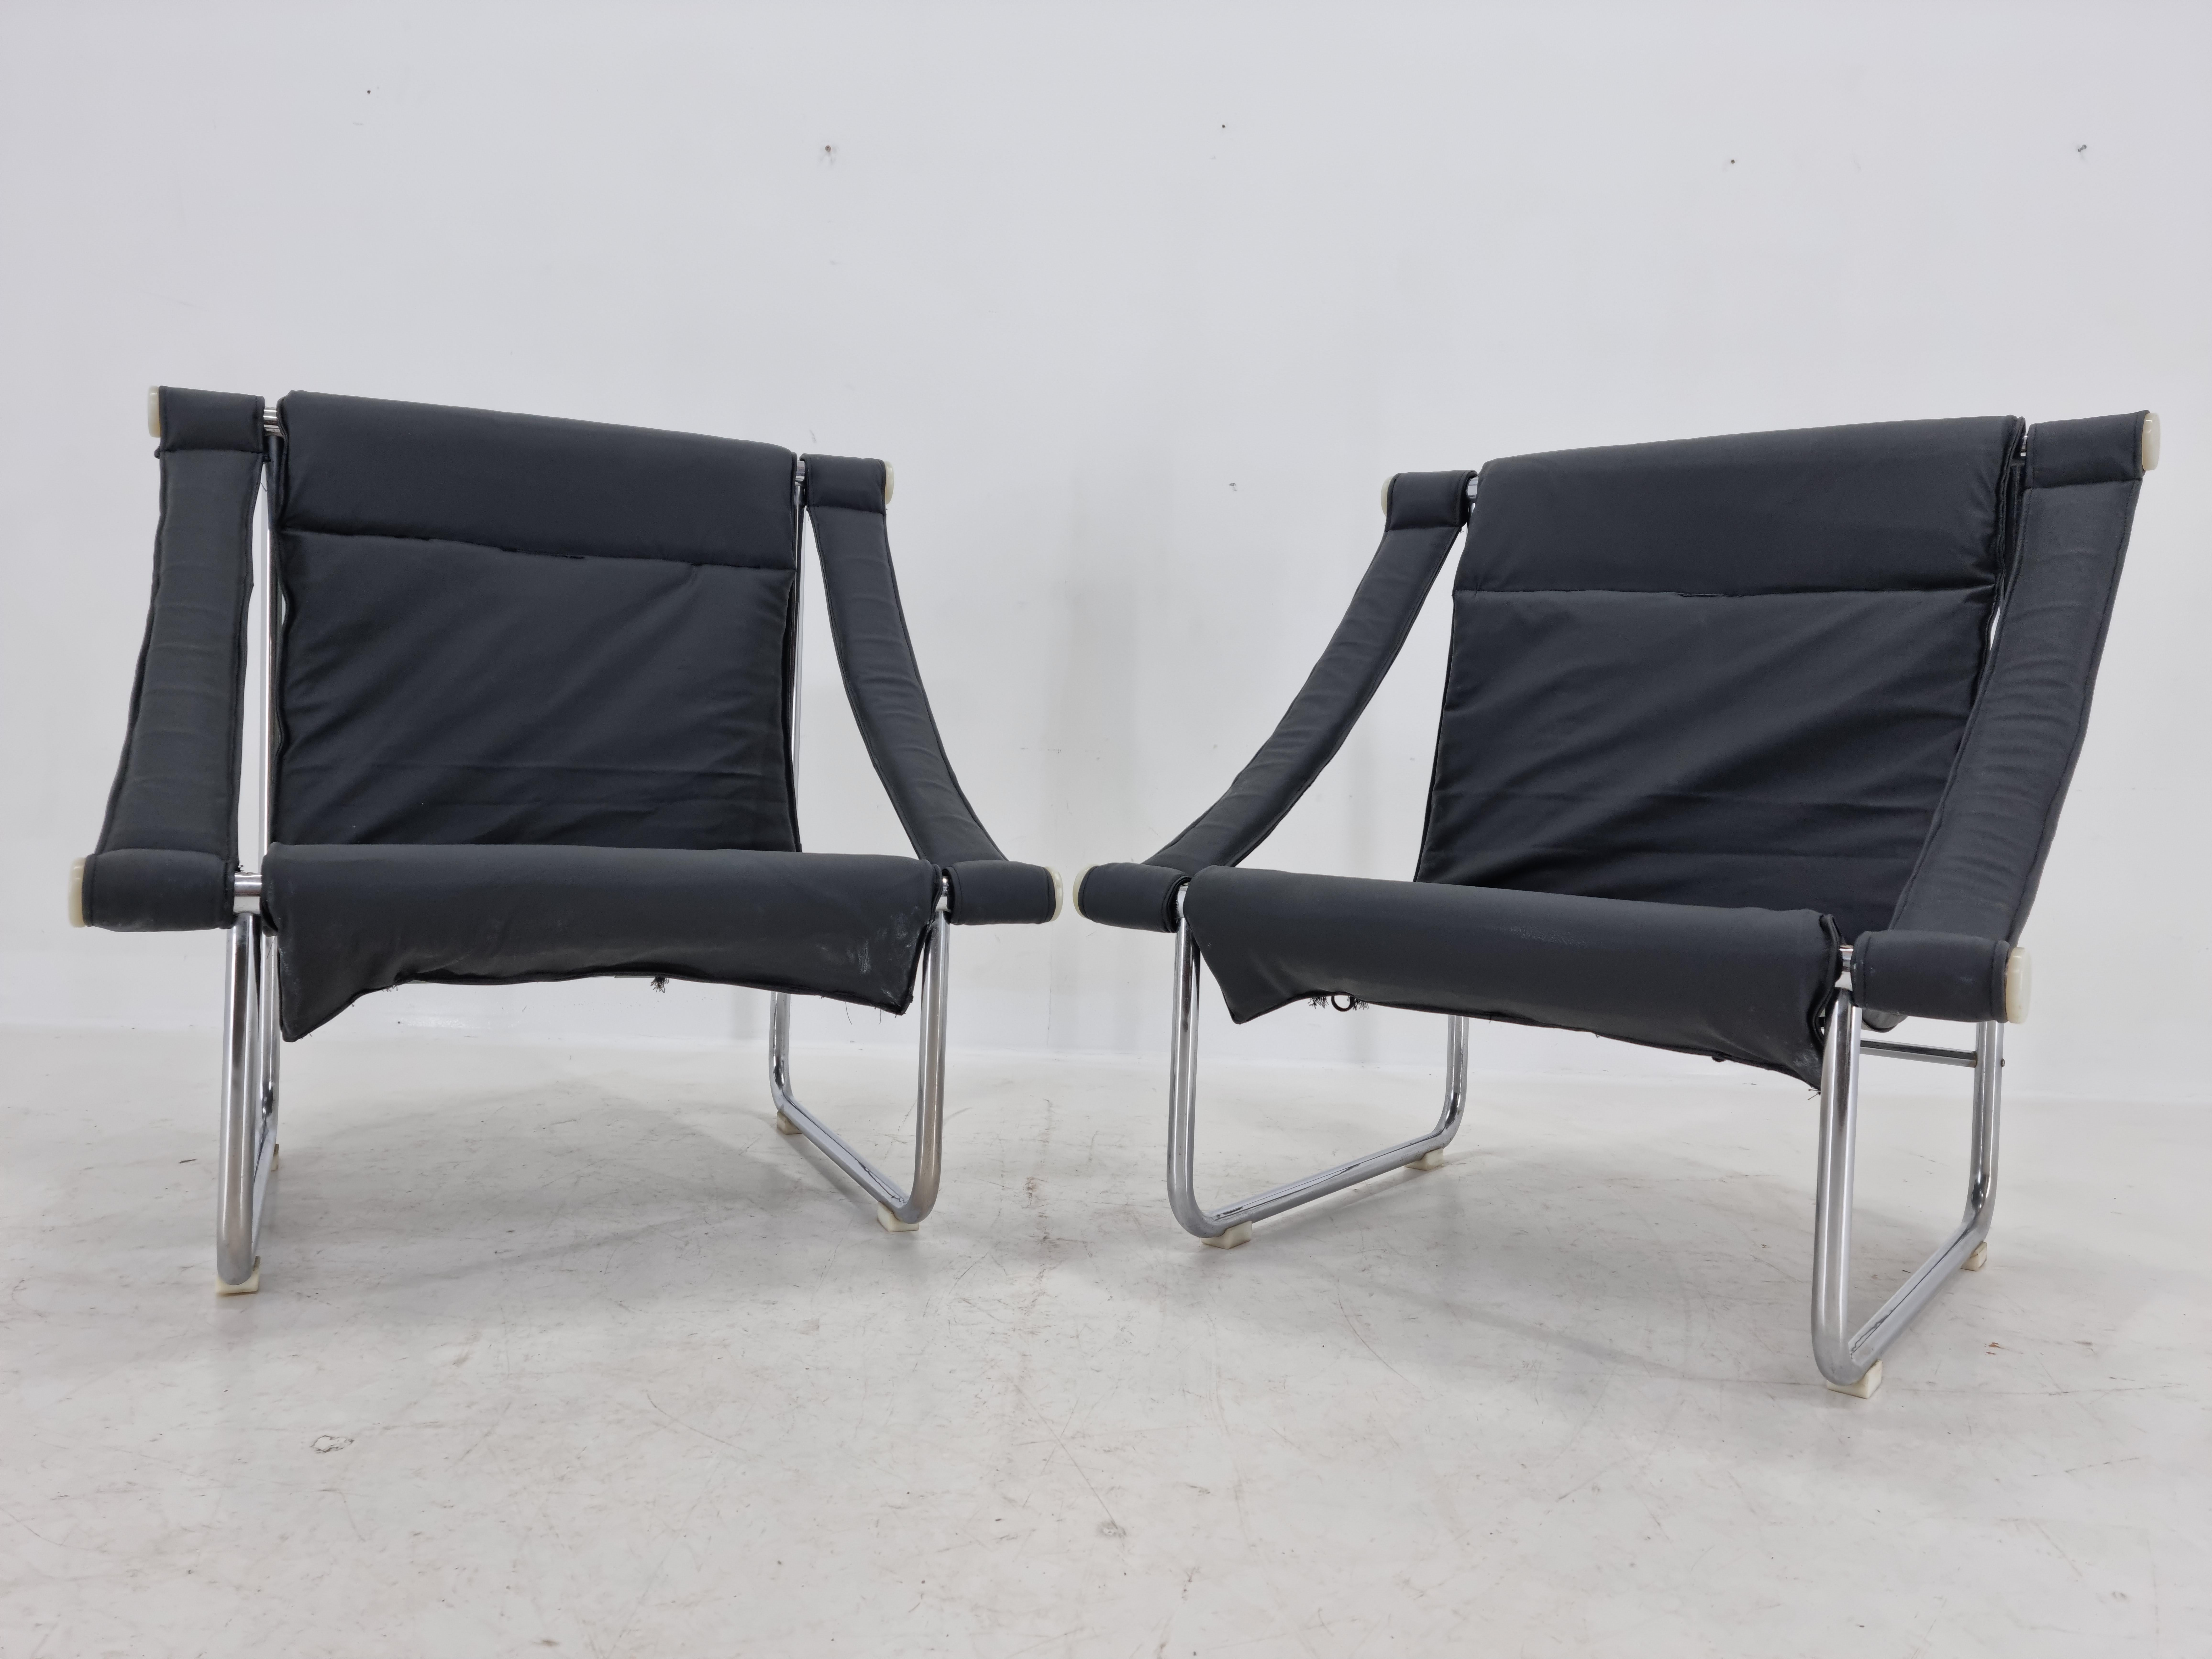 Pair of Midcentury Chrome and Leather Armchairs, 1970s For Sale 5